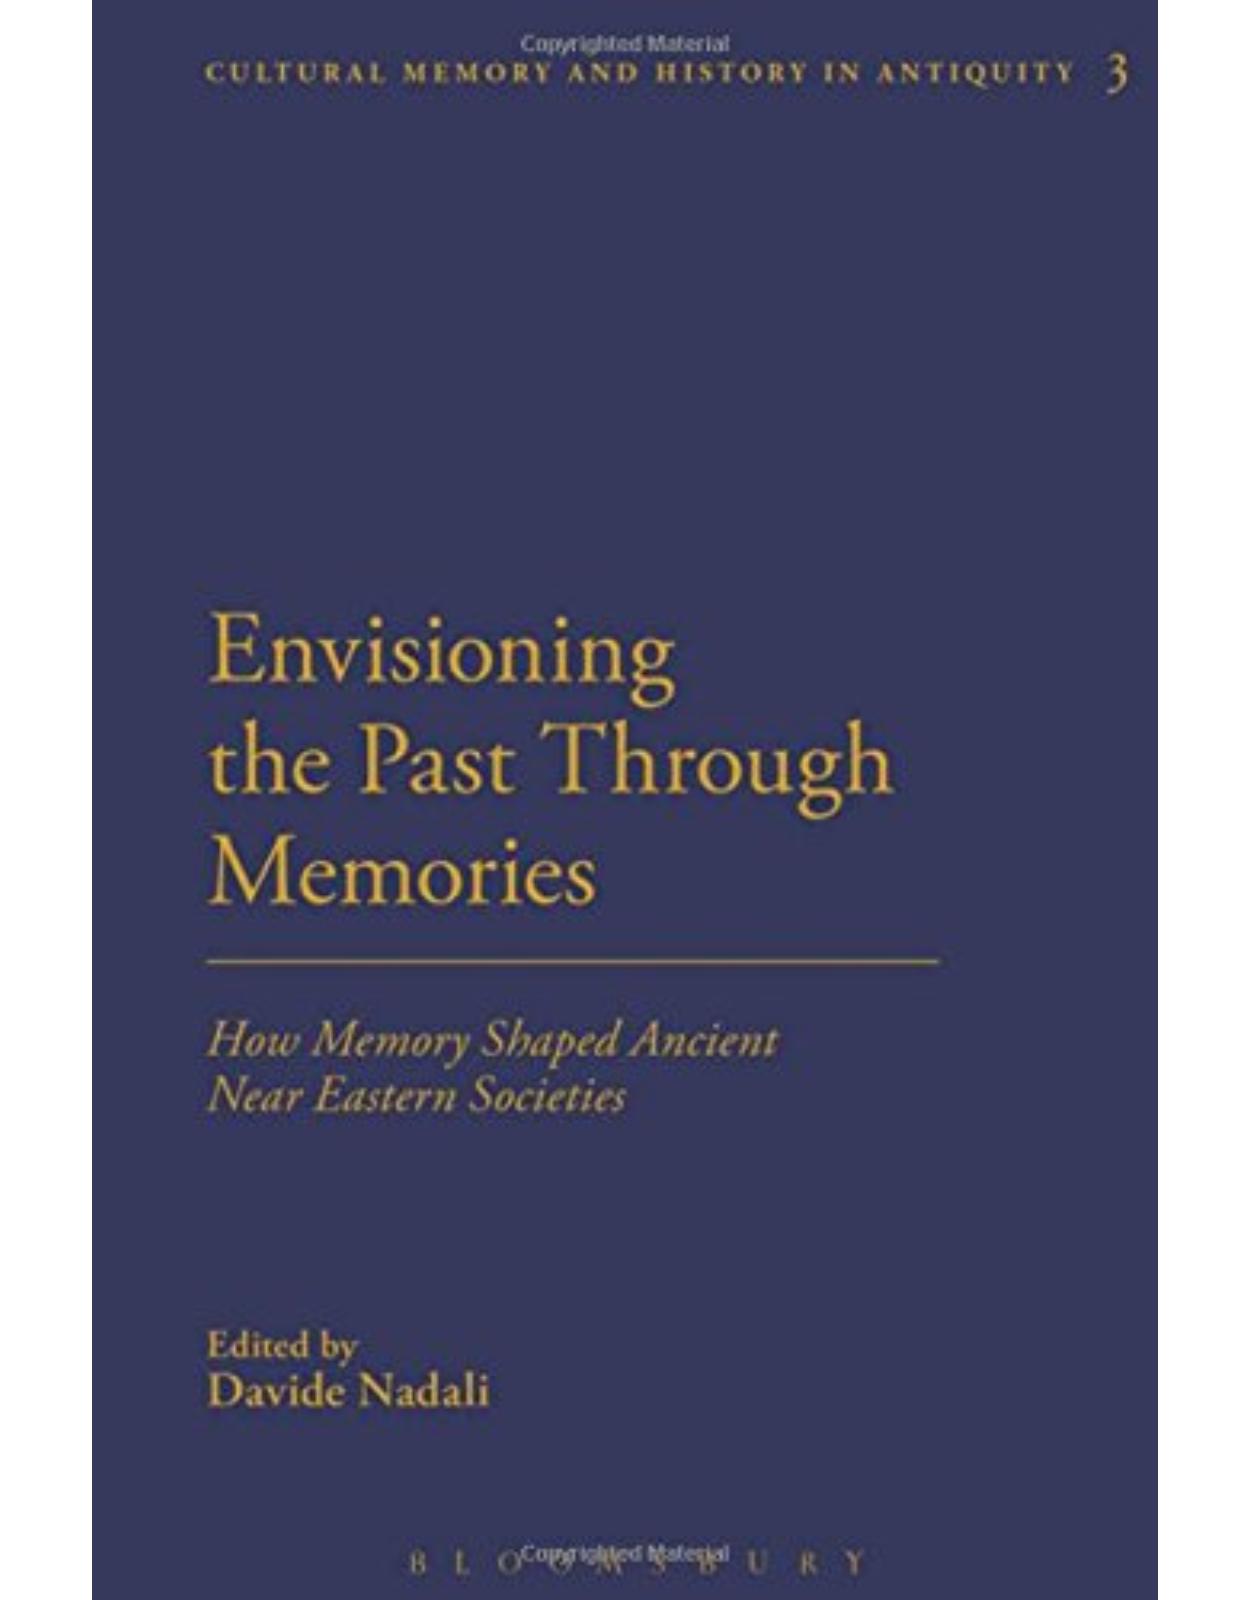 Envisioning the Past Through Memories: How Memory Shaped Ancient Near Eastern Societies